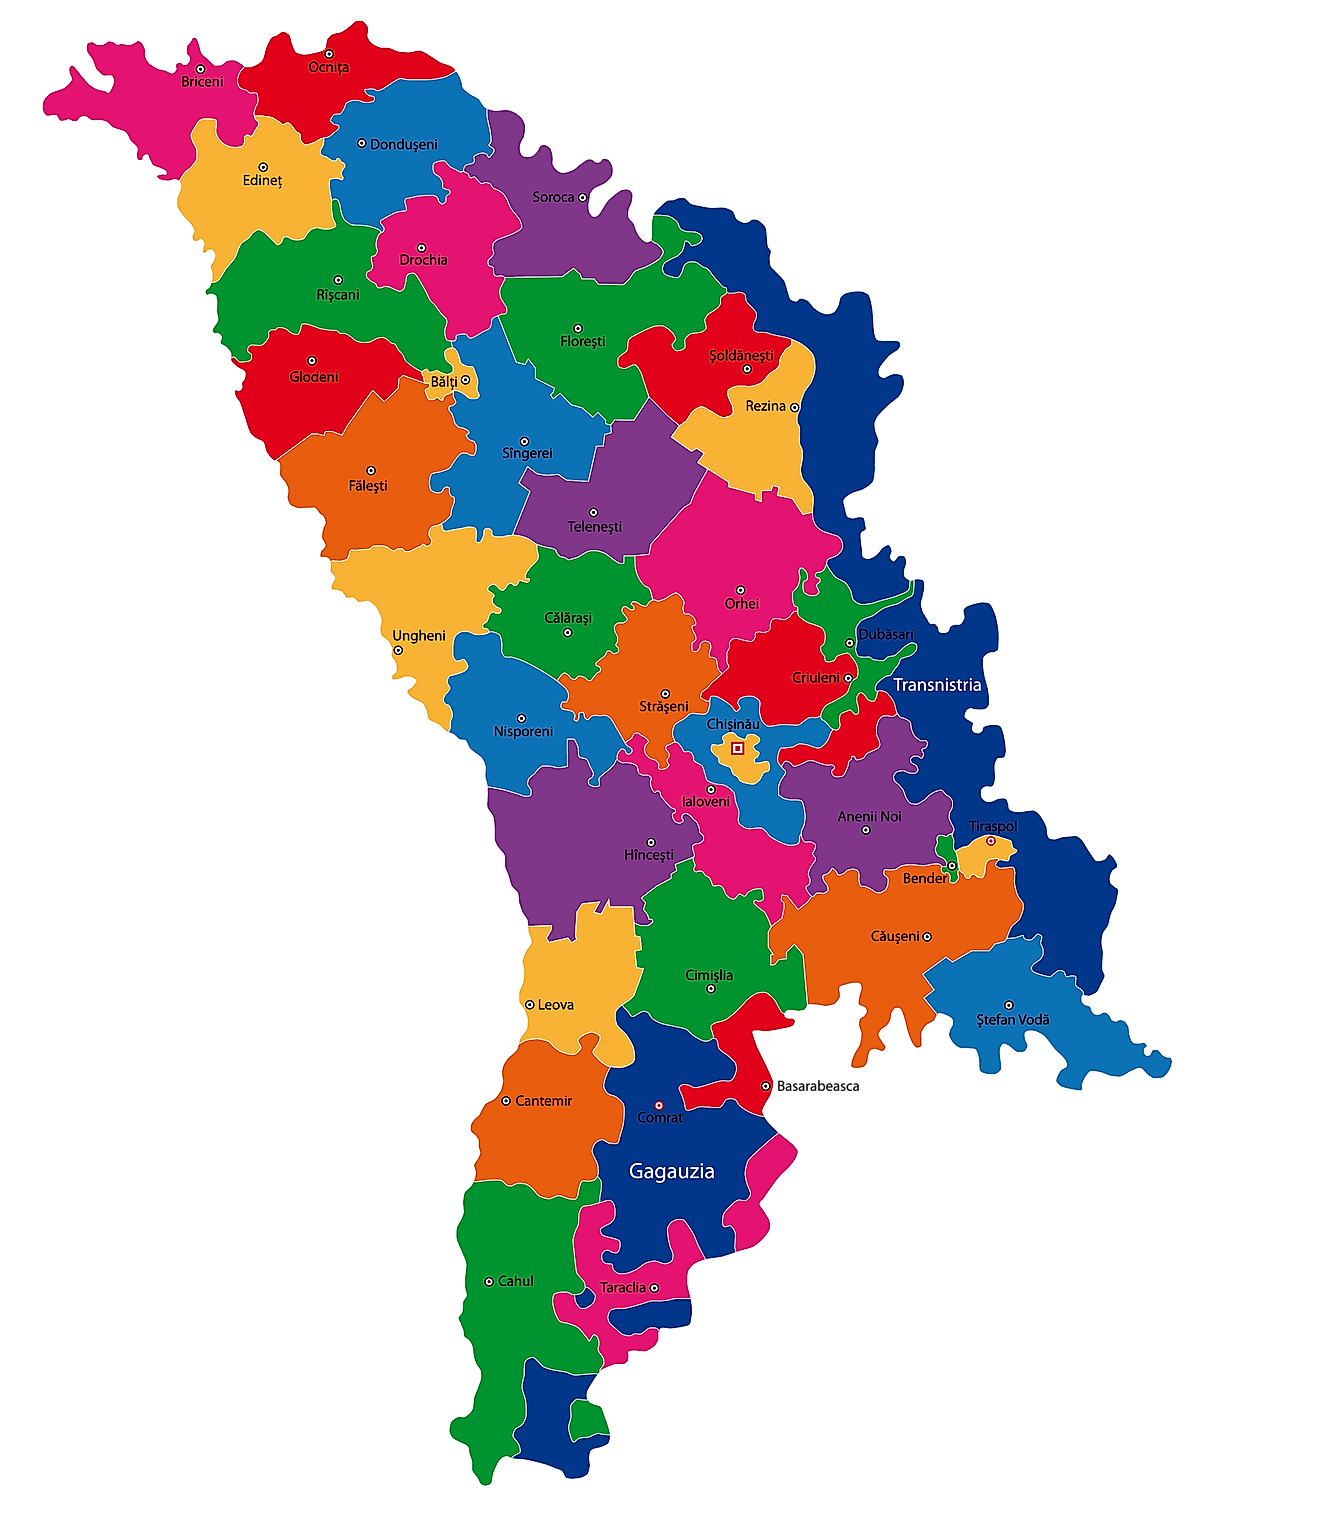 Political Map of Moldova showing its 32 raions and the capital city of Chisinau.